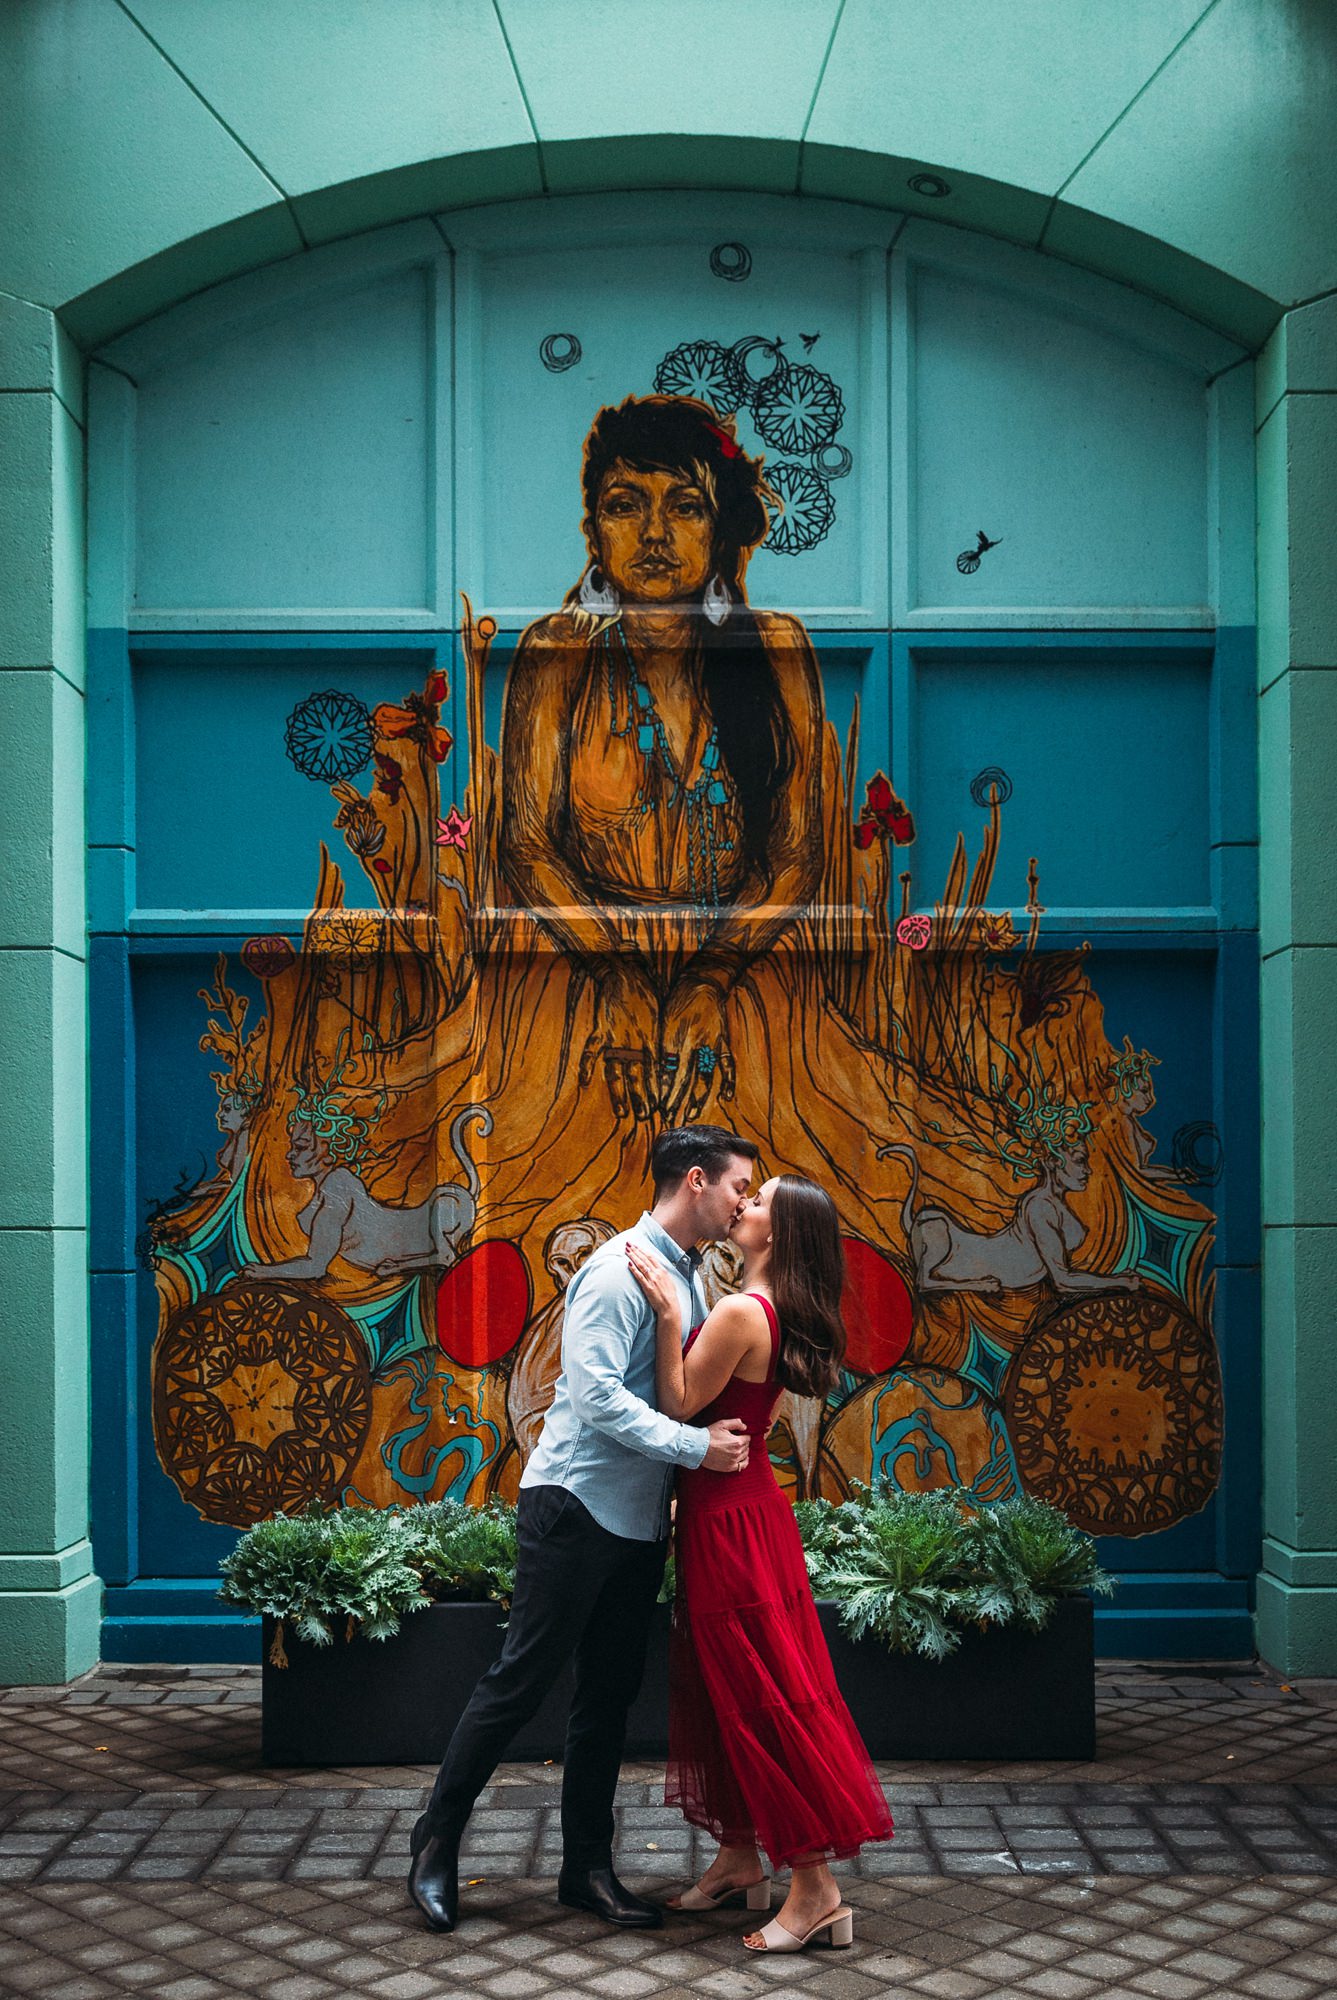 Couple kissing in front of mural